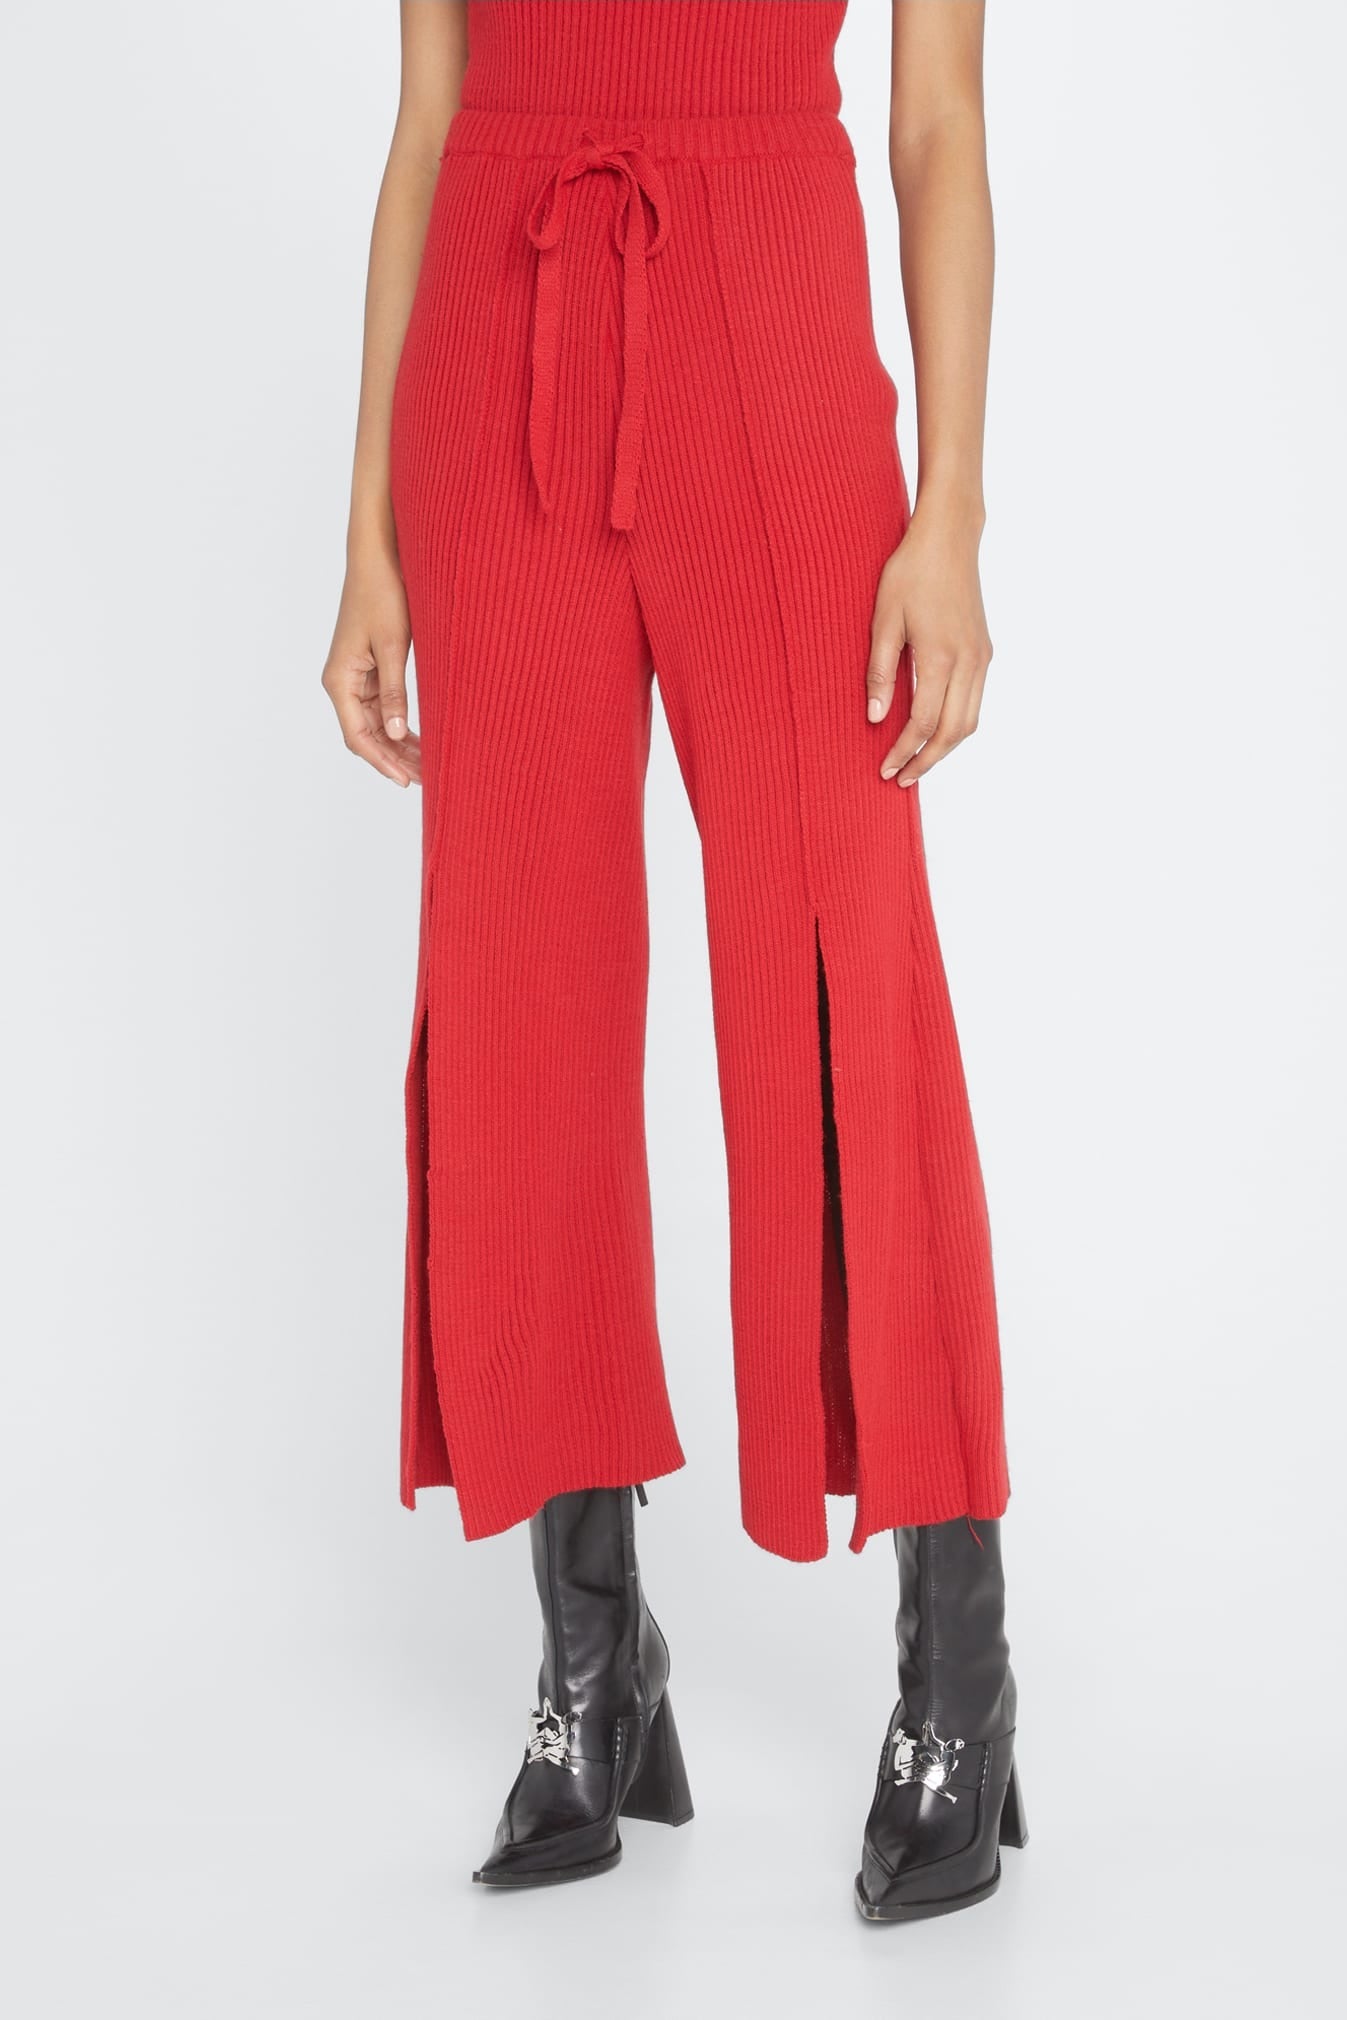 Thebe Magugu- Split Front Trousers: Red